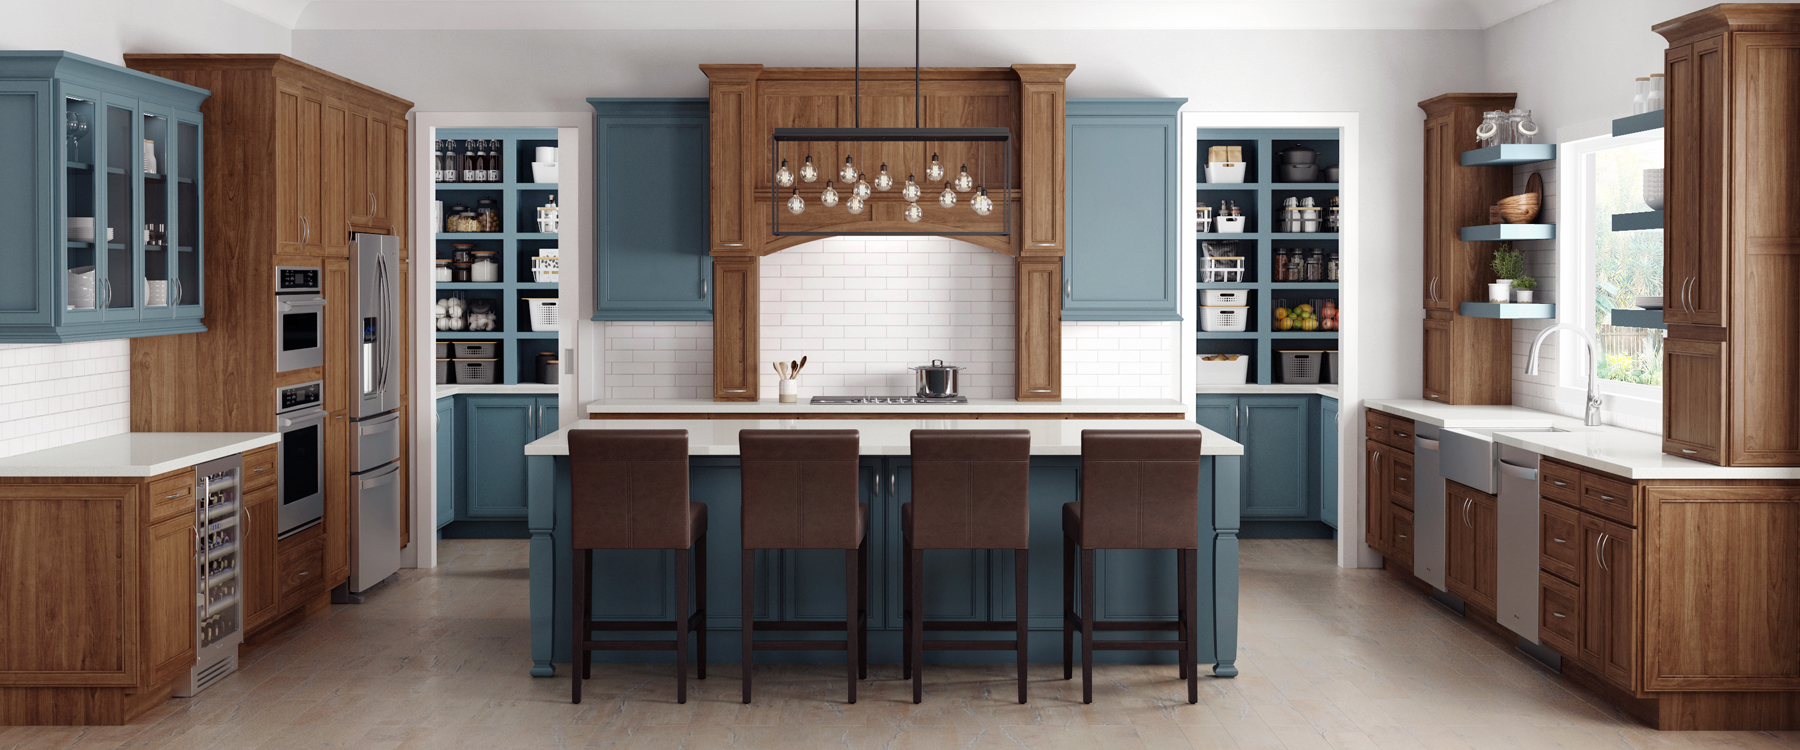 Kitchen Cabinets Custom Cabinetry